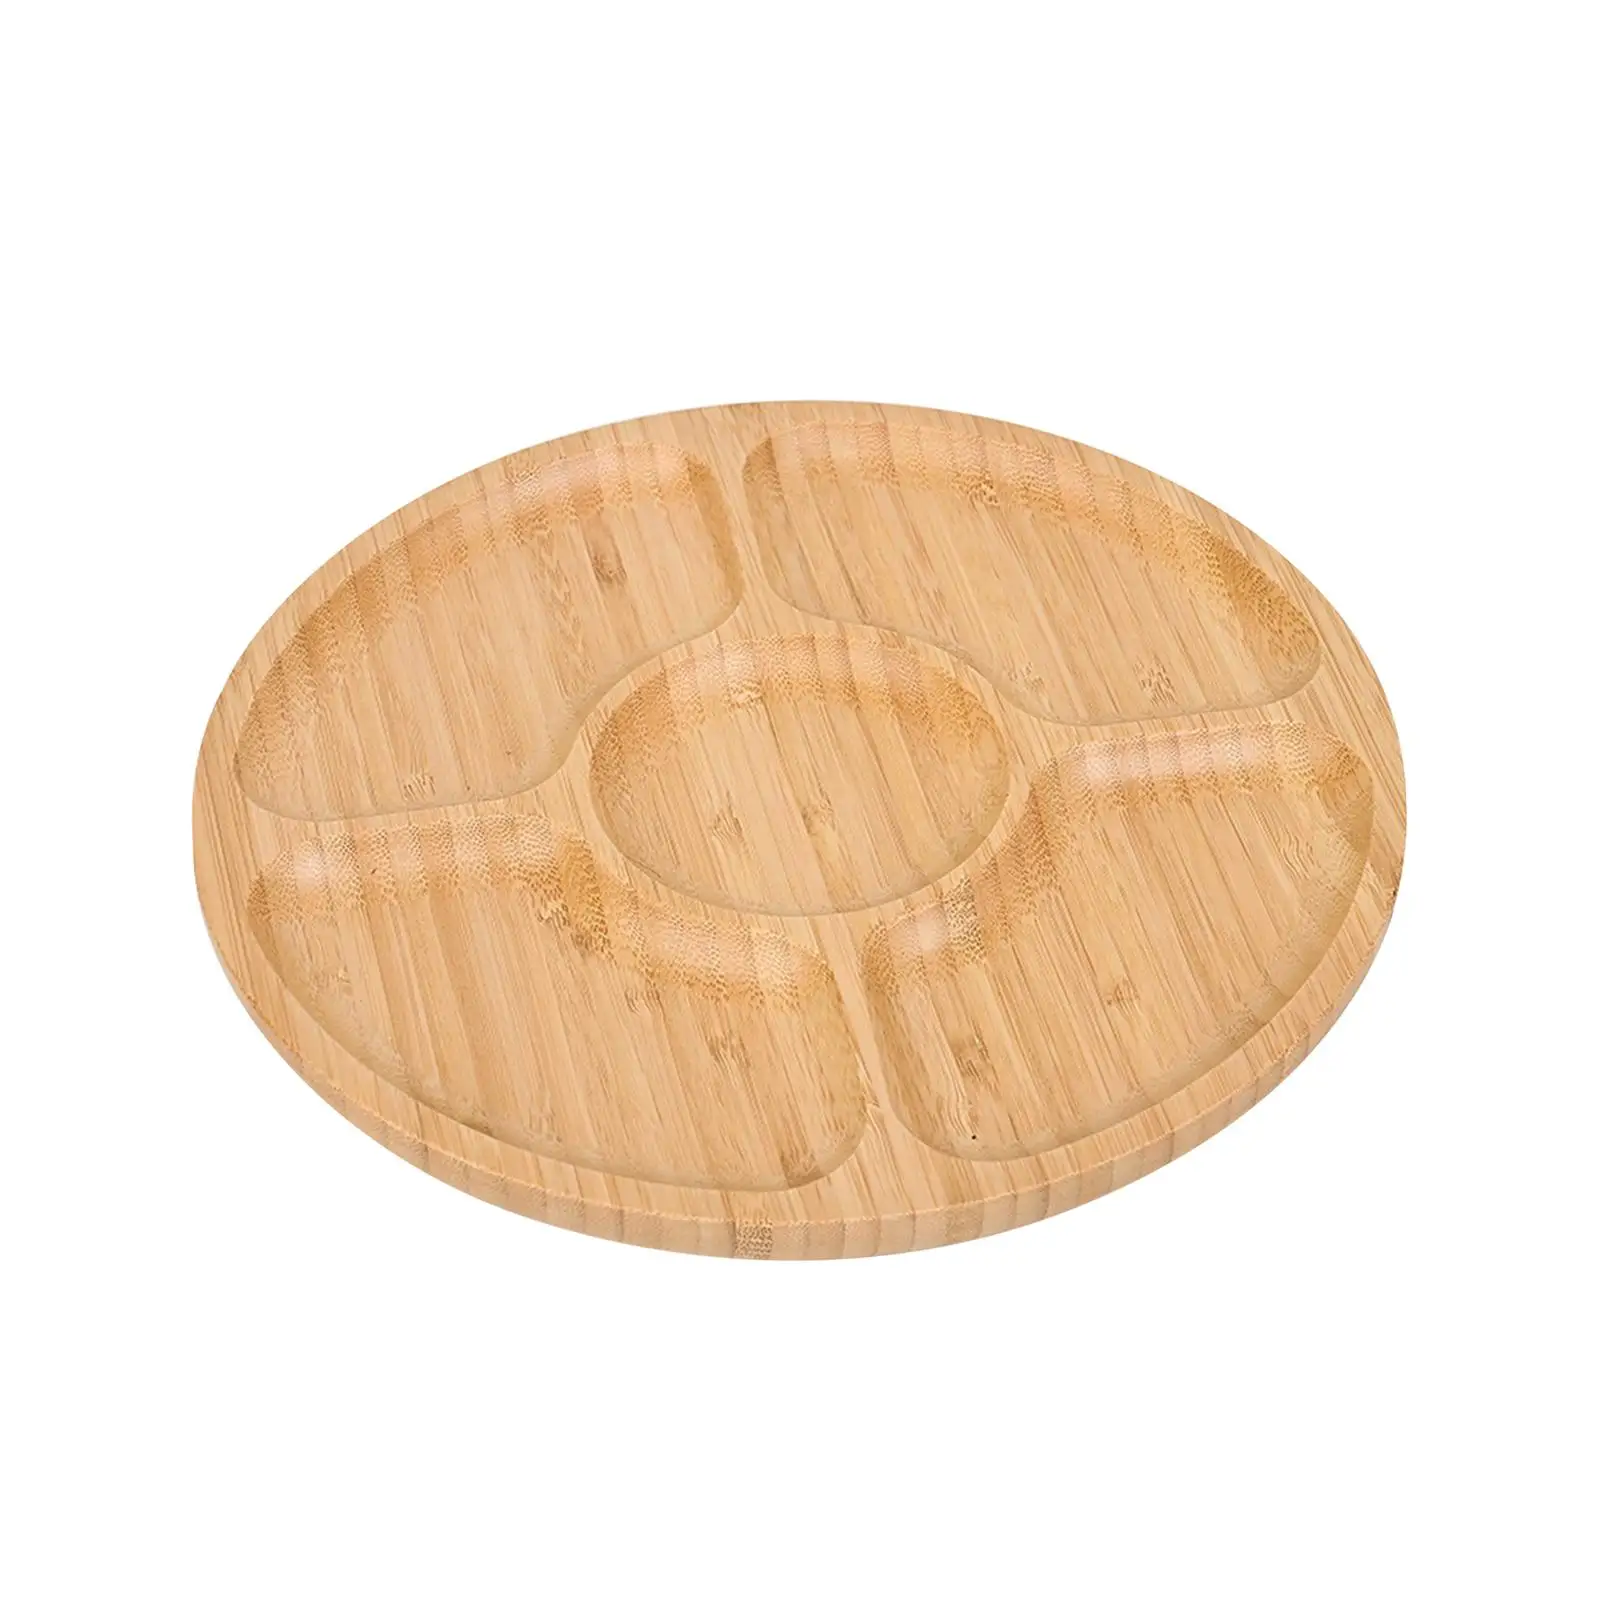 Wooden Tray Family Dinner Decor Fruit Plate for Cheese Wedding Appetizer